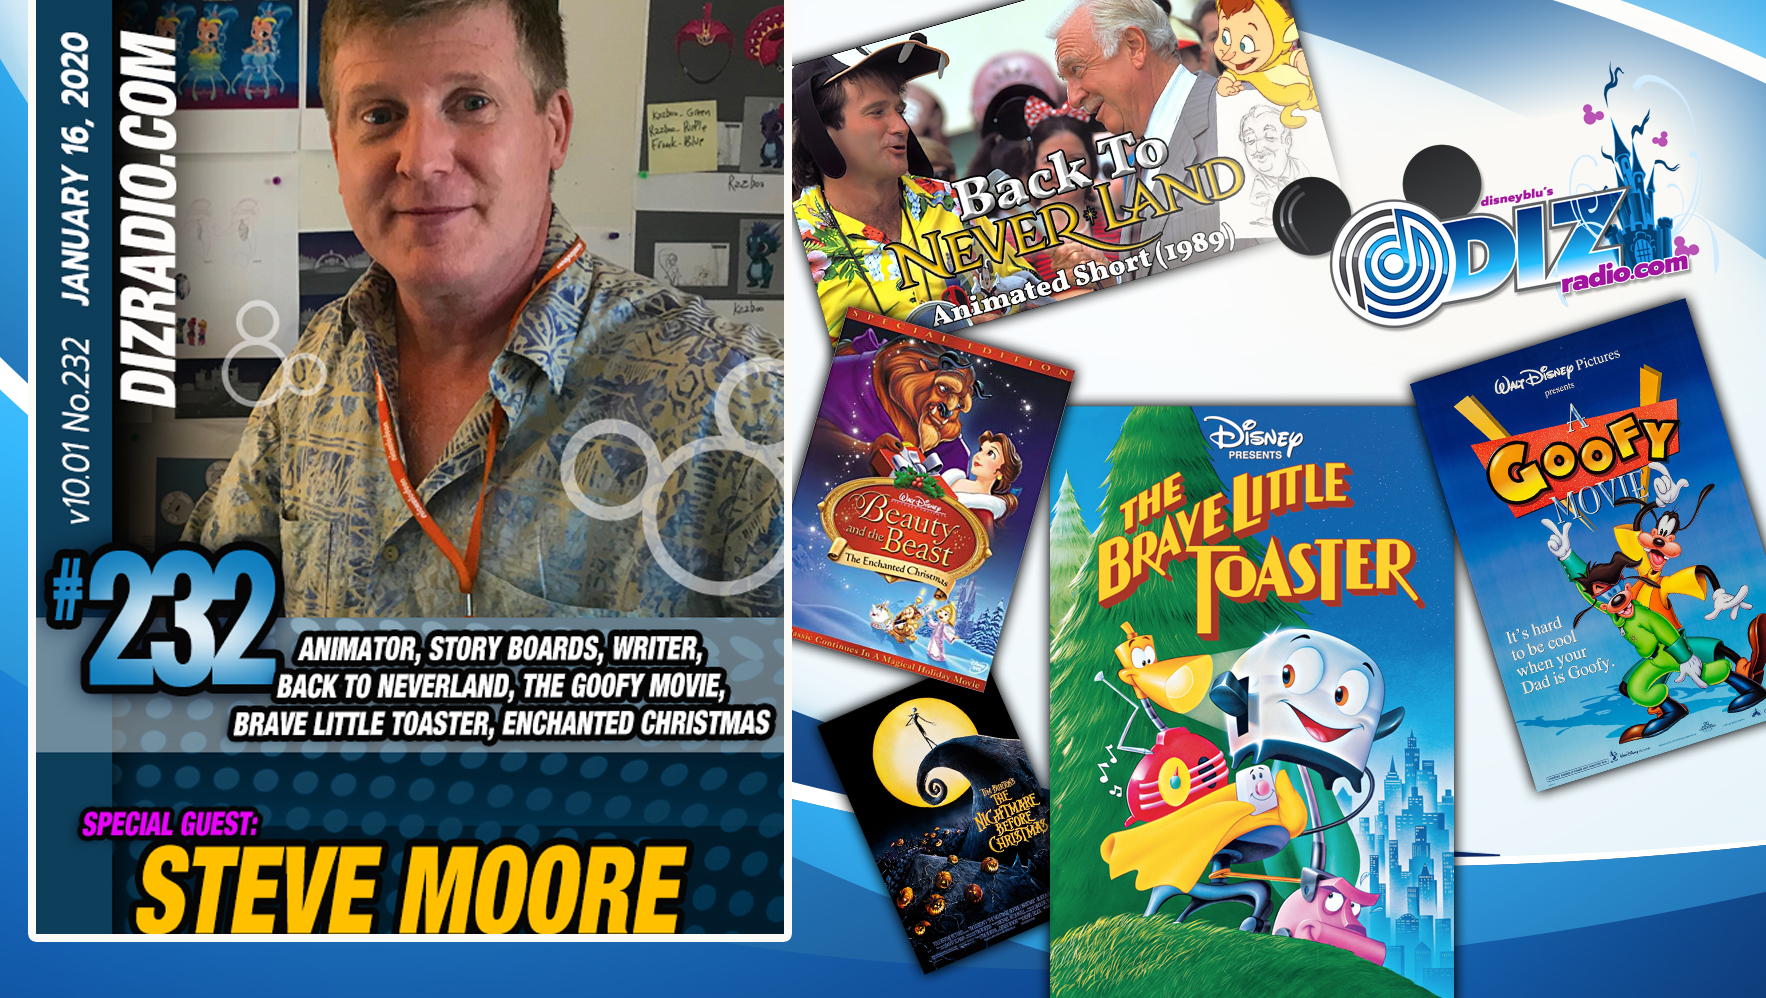 DisneyBlu's DizRadio Disney on Demand Show #232 w/ Guest STEVE MOORE (Disney Animator, Writer, Director, The Goofy Movie, Brave Little Toaster, Back to Neverland, Beauty and the Beast The Enchanted Christmas and more)